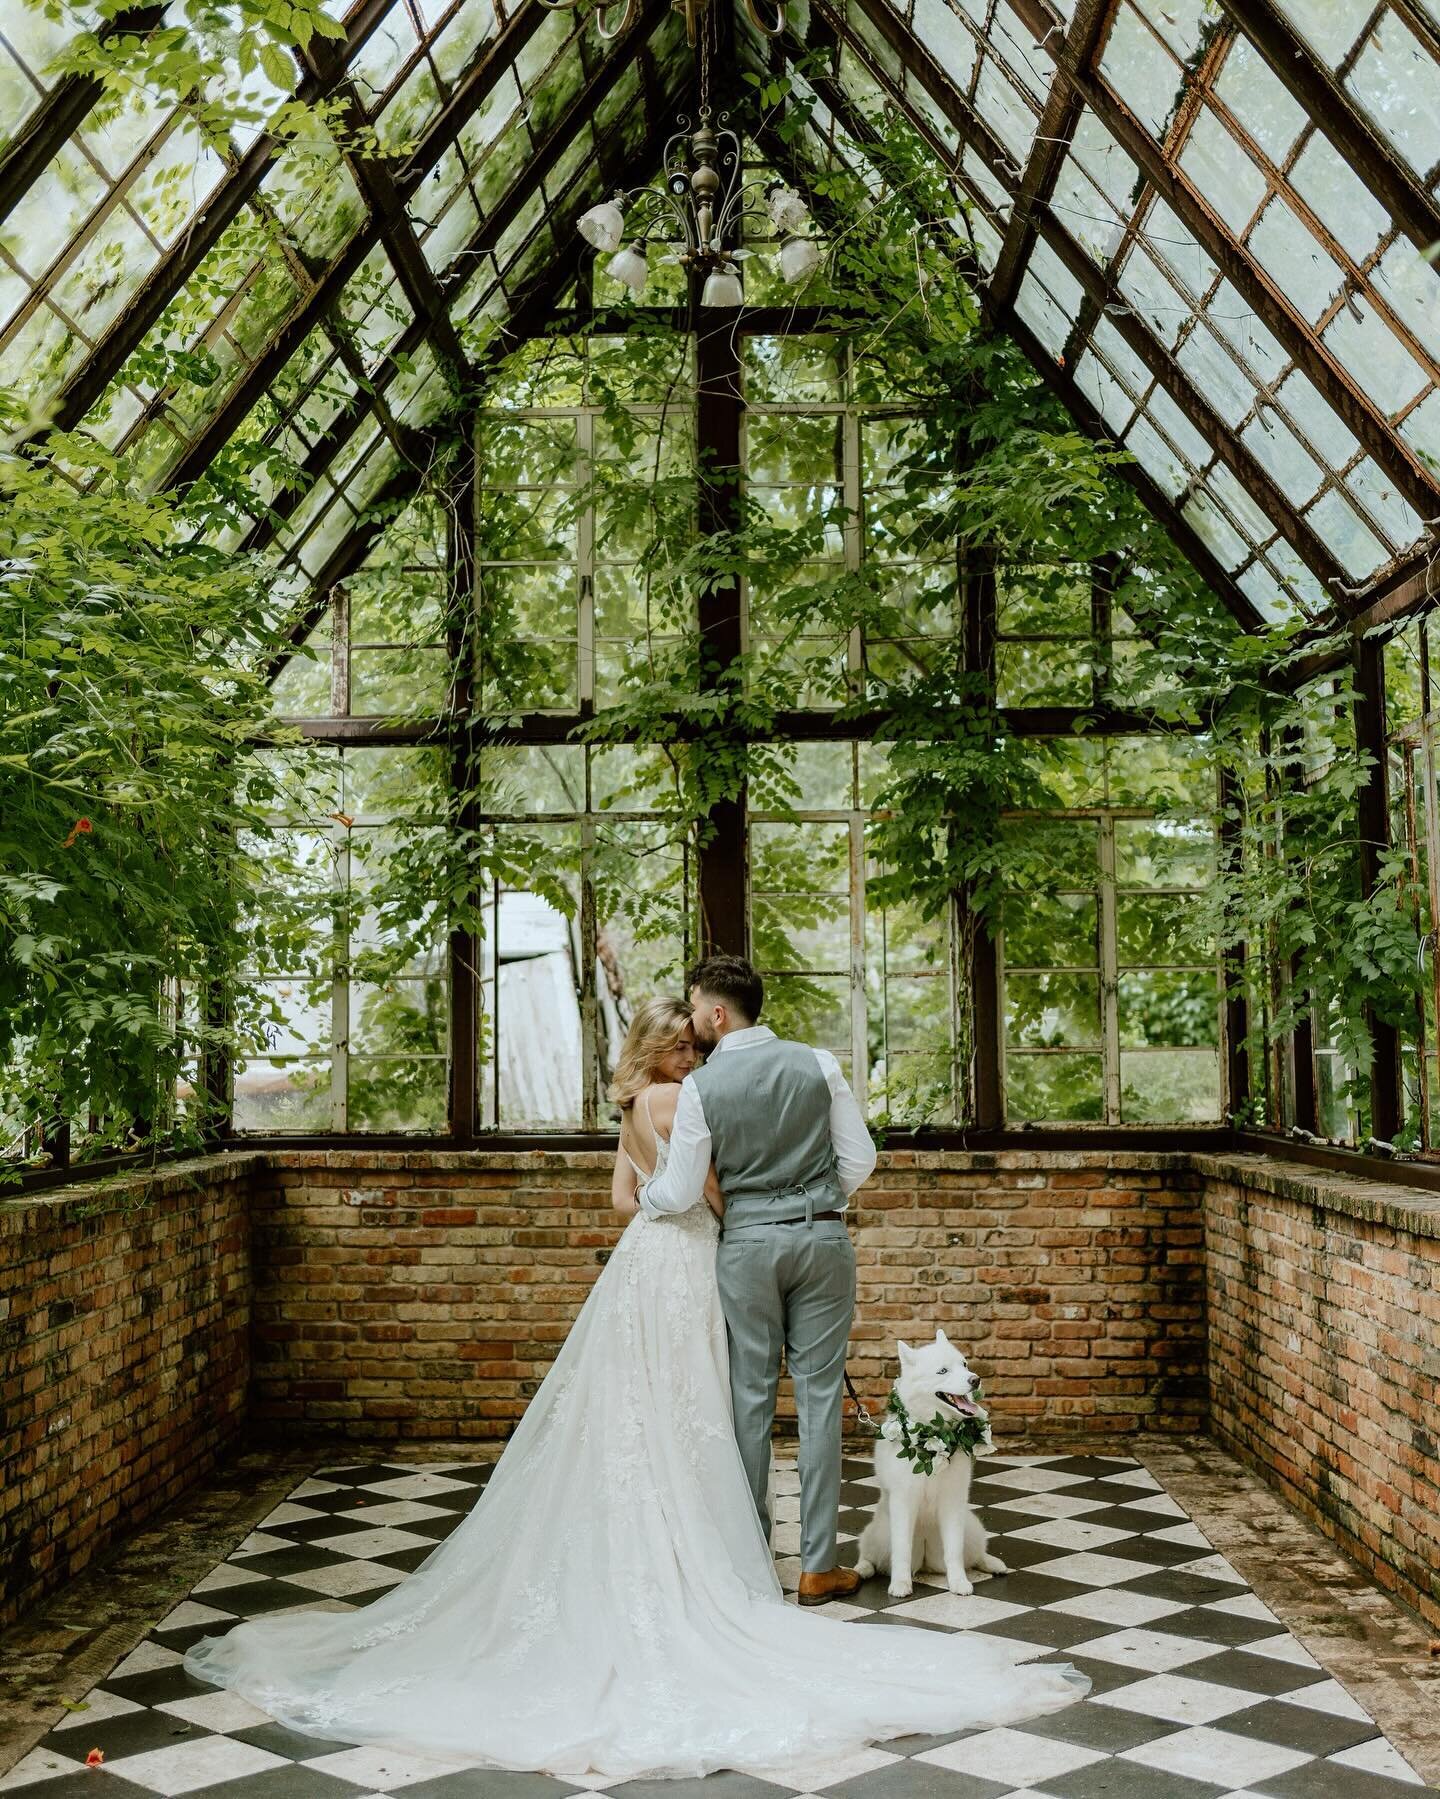 While not every paw can walk down the aisle, every wag of the tail adds to the joy 🐾 Today, we&rsquo;re throwing it back to the sweetest month-after session with Bella, the adorable fur baby of one of my cherished couples! 

At this point y&rsquo;al